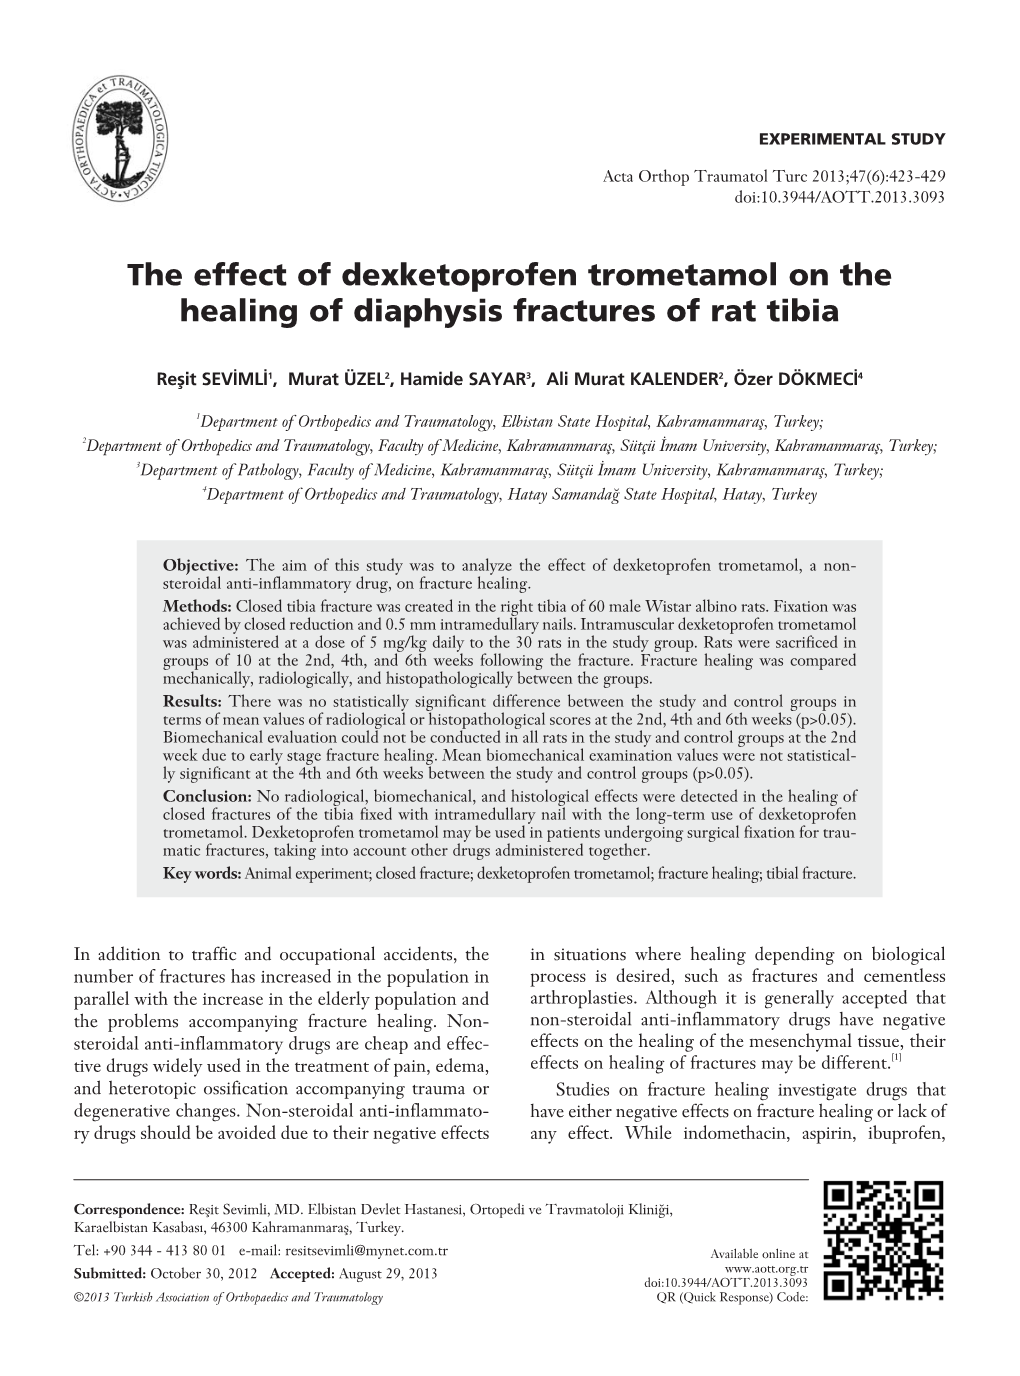 The Effect of Dexketoprofen Trometamol on the Healing of Diaphysis Fractures of Rat Tibia